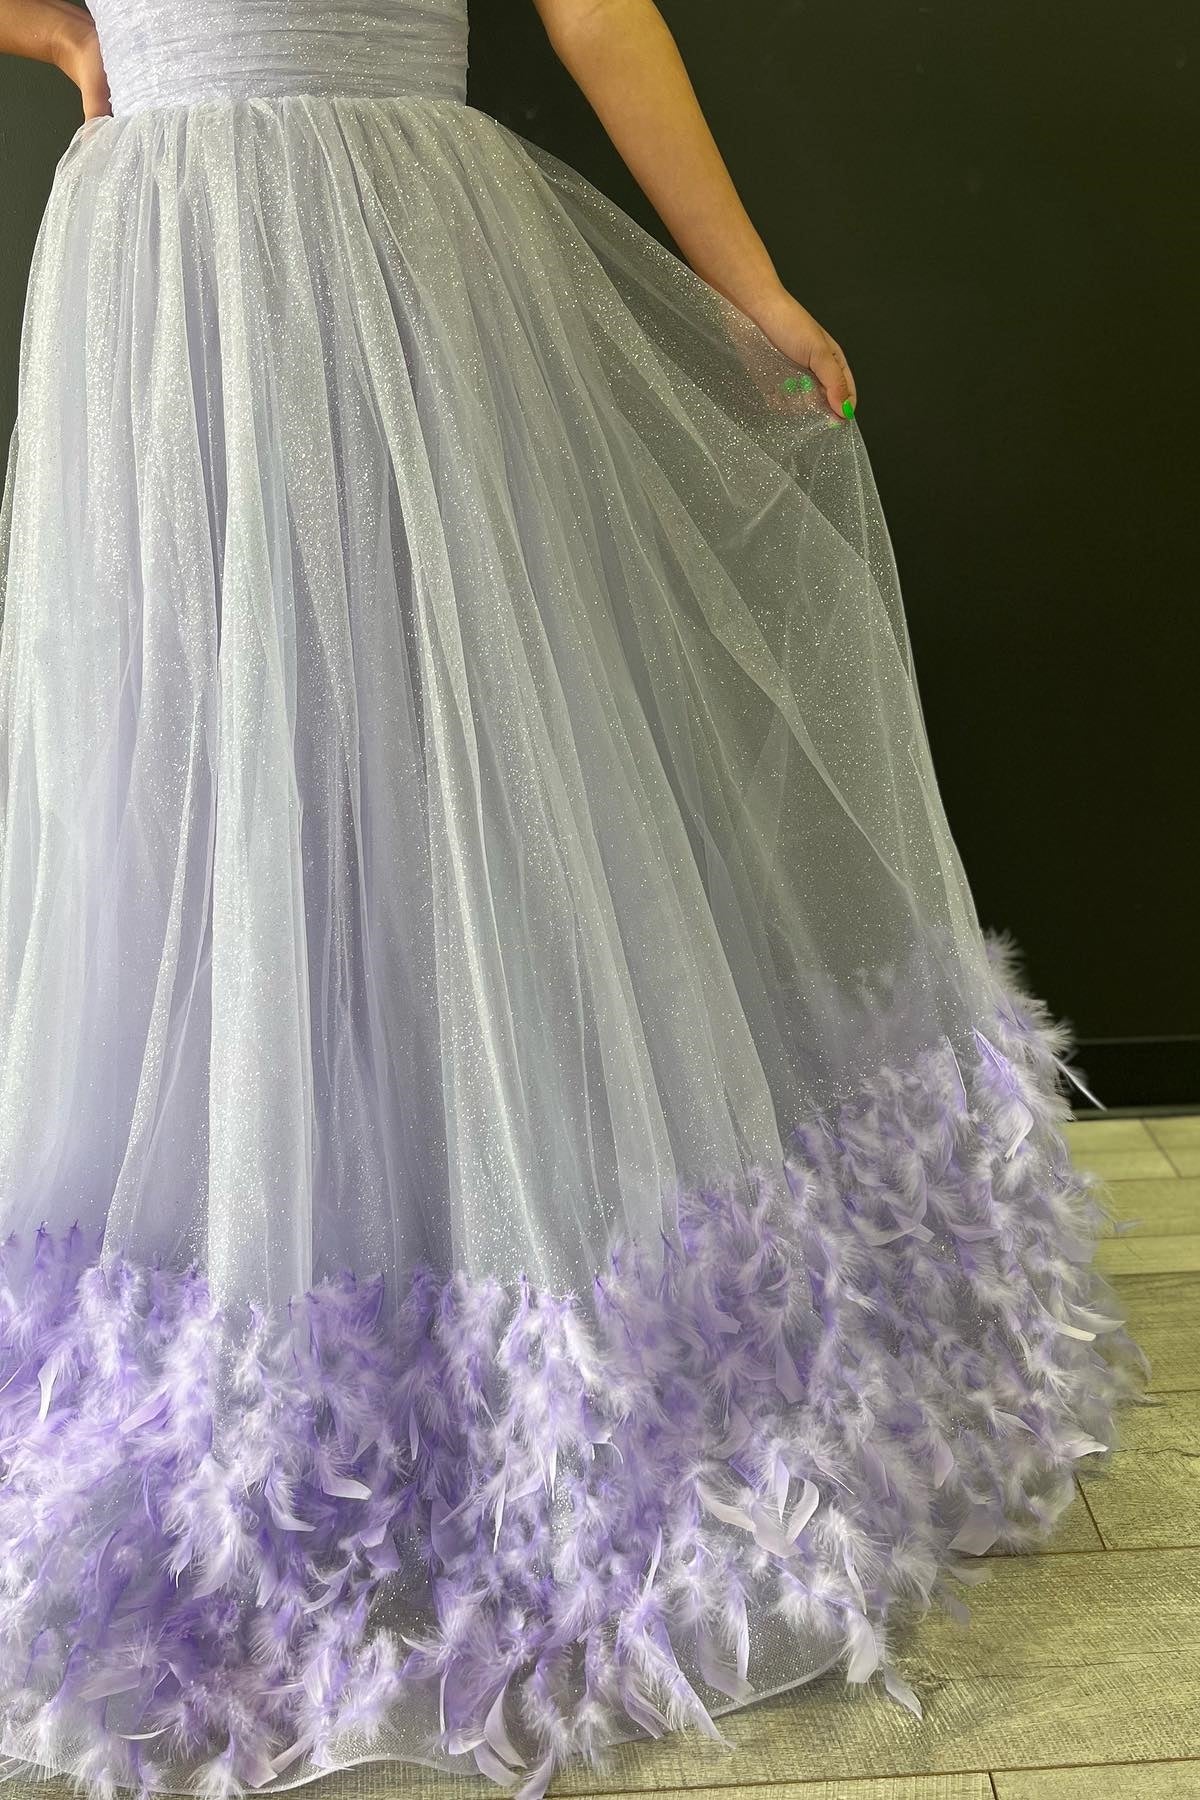 Lavender Strapless Pleated A-Line Prom Dress with Feathers